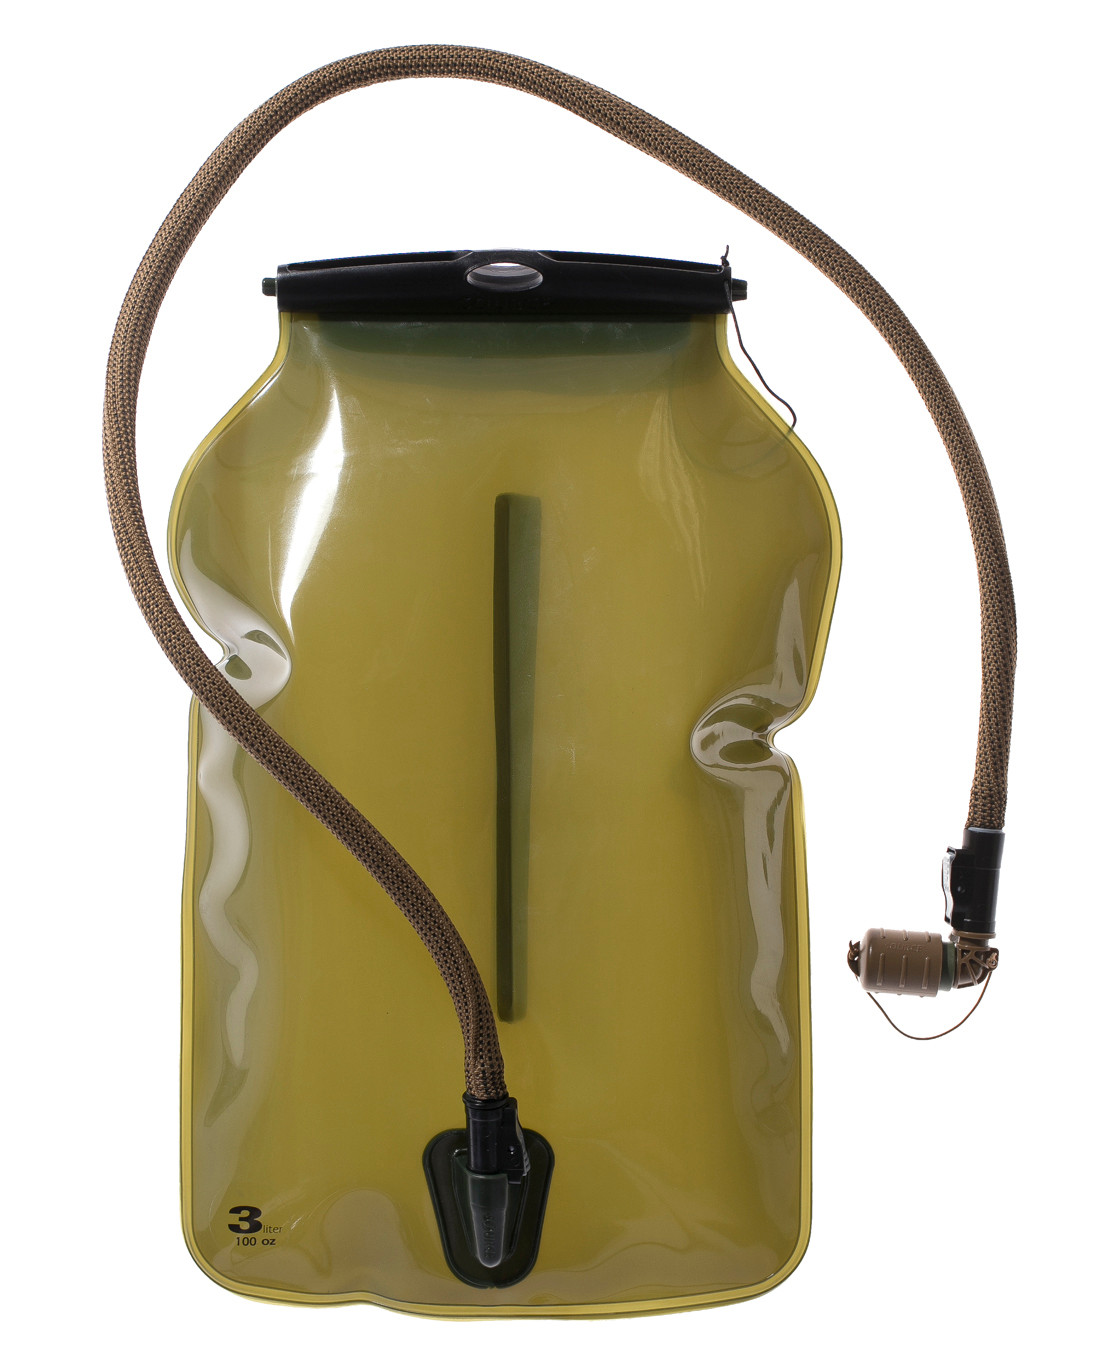 Source wlps 3 L Widepac Profil Bas Système d/'hydratation Coyote Brown